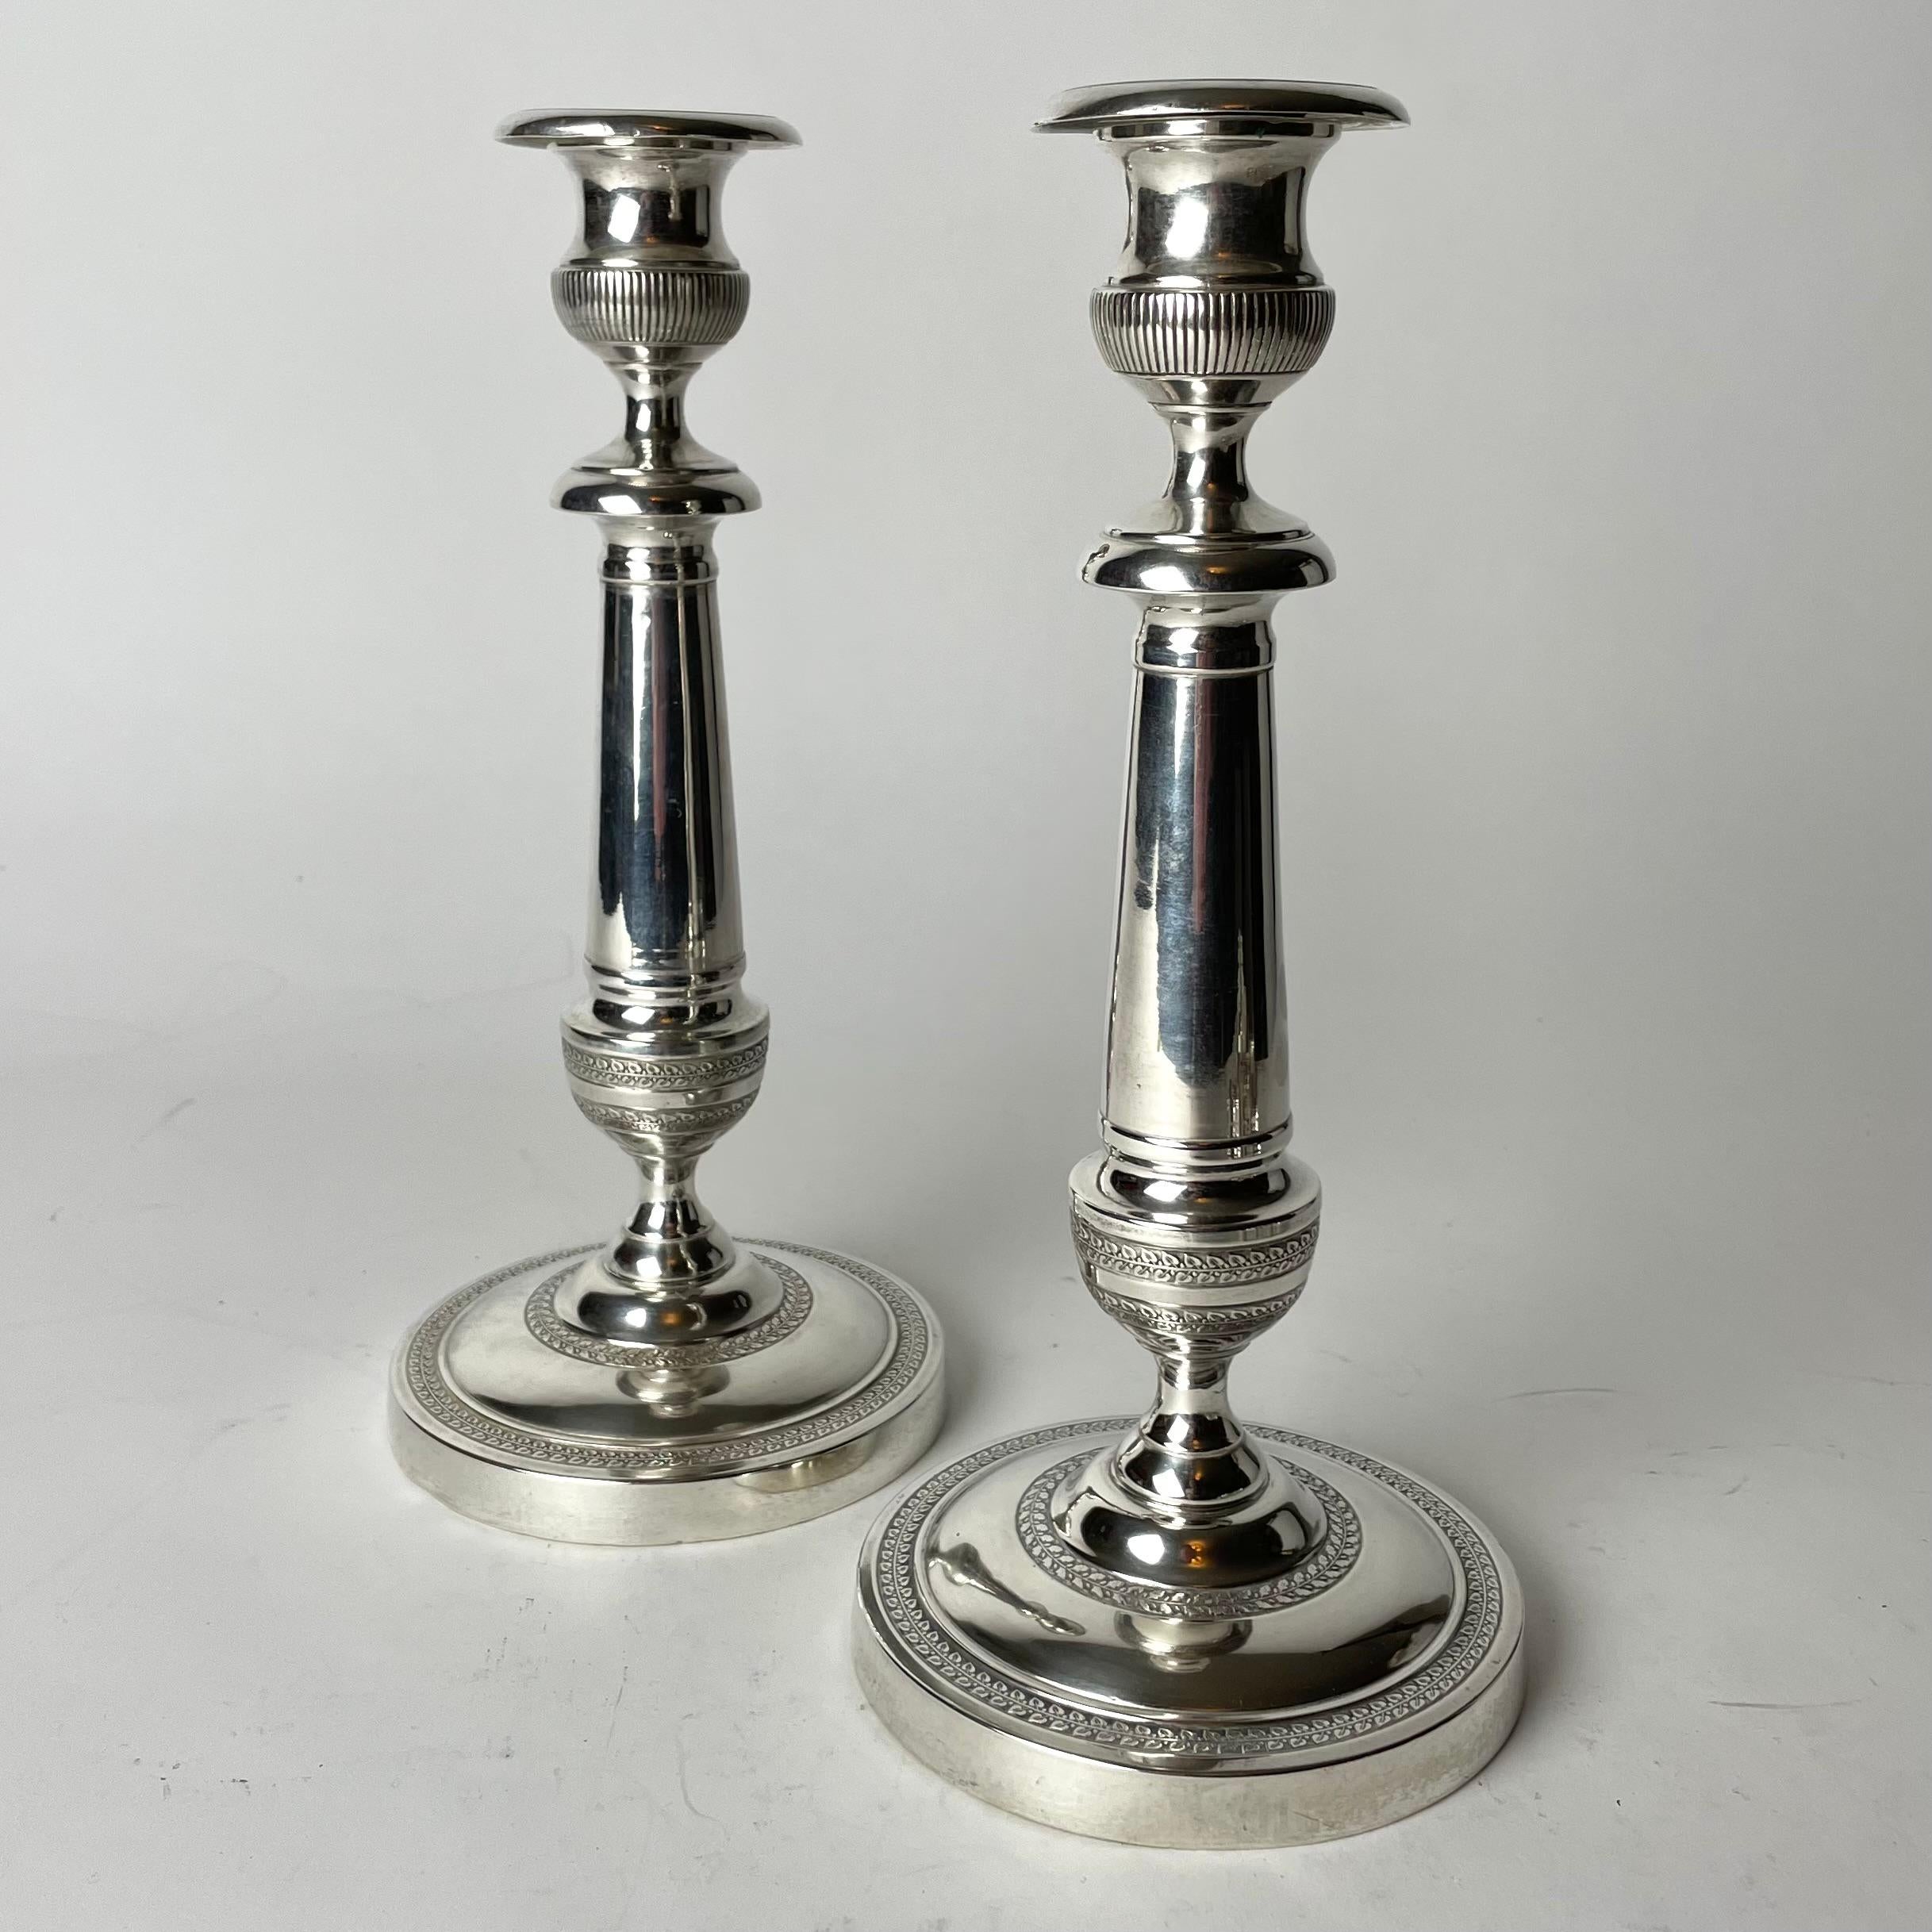 Early 19th Century A pair of beautiful silver-plated Candelabras. Swedish Empire from the 1820s For Sale